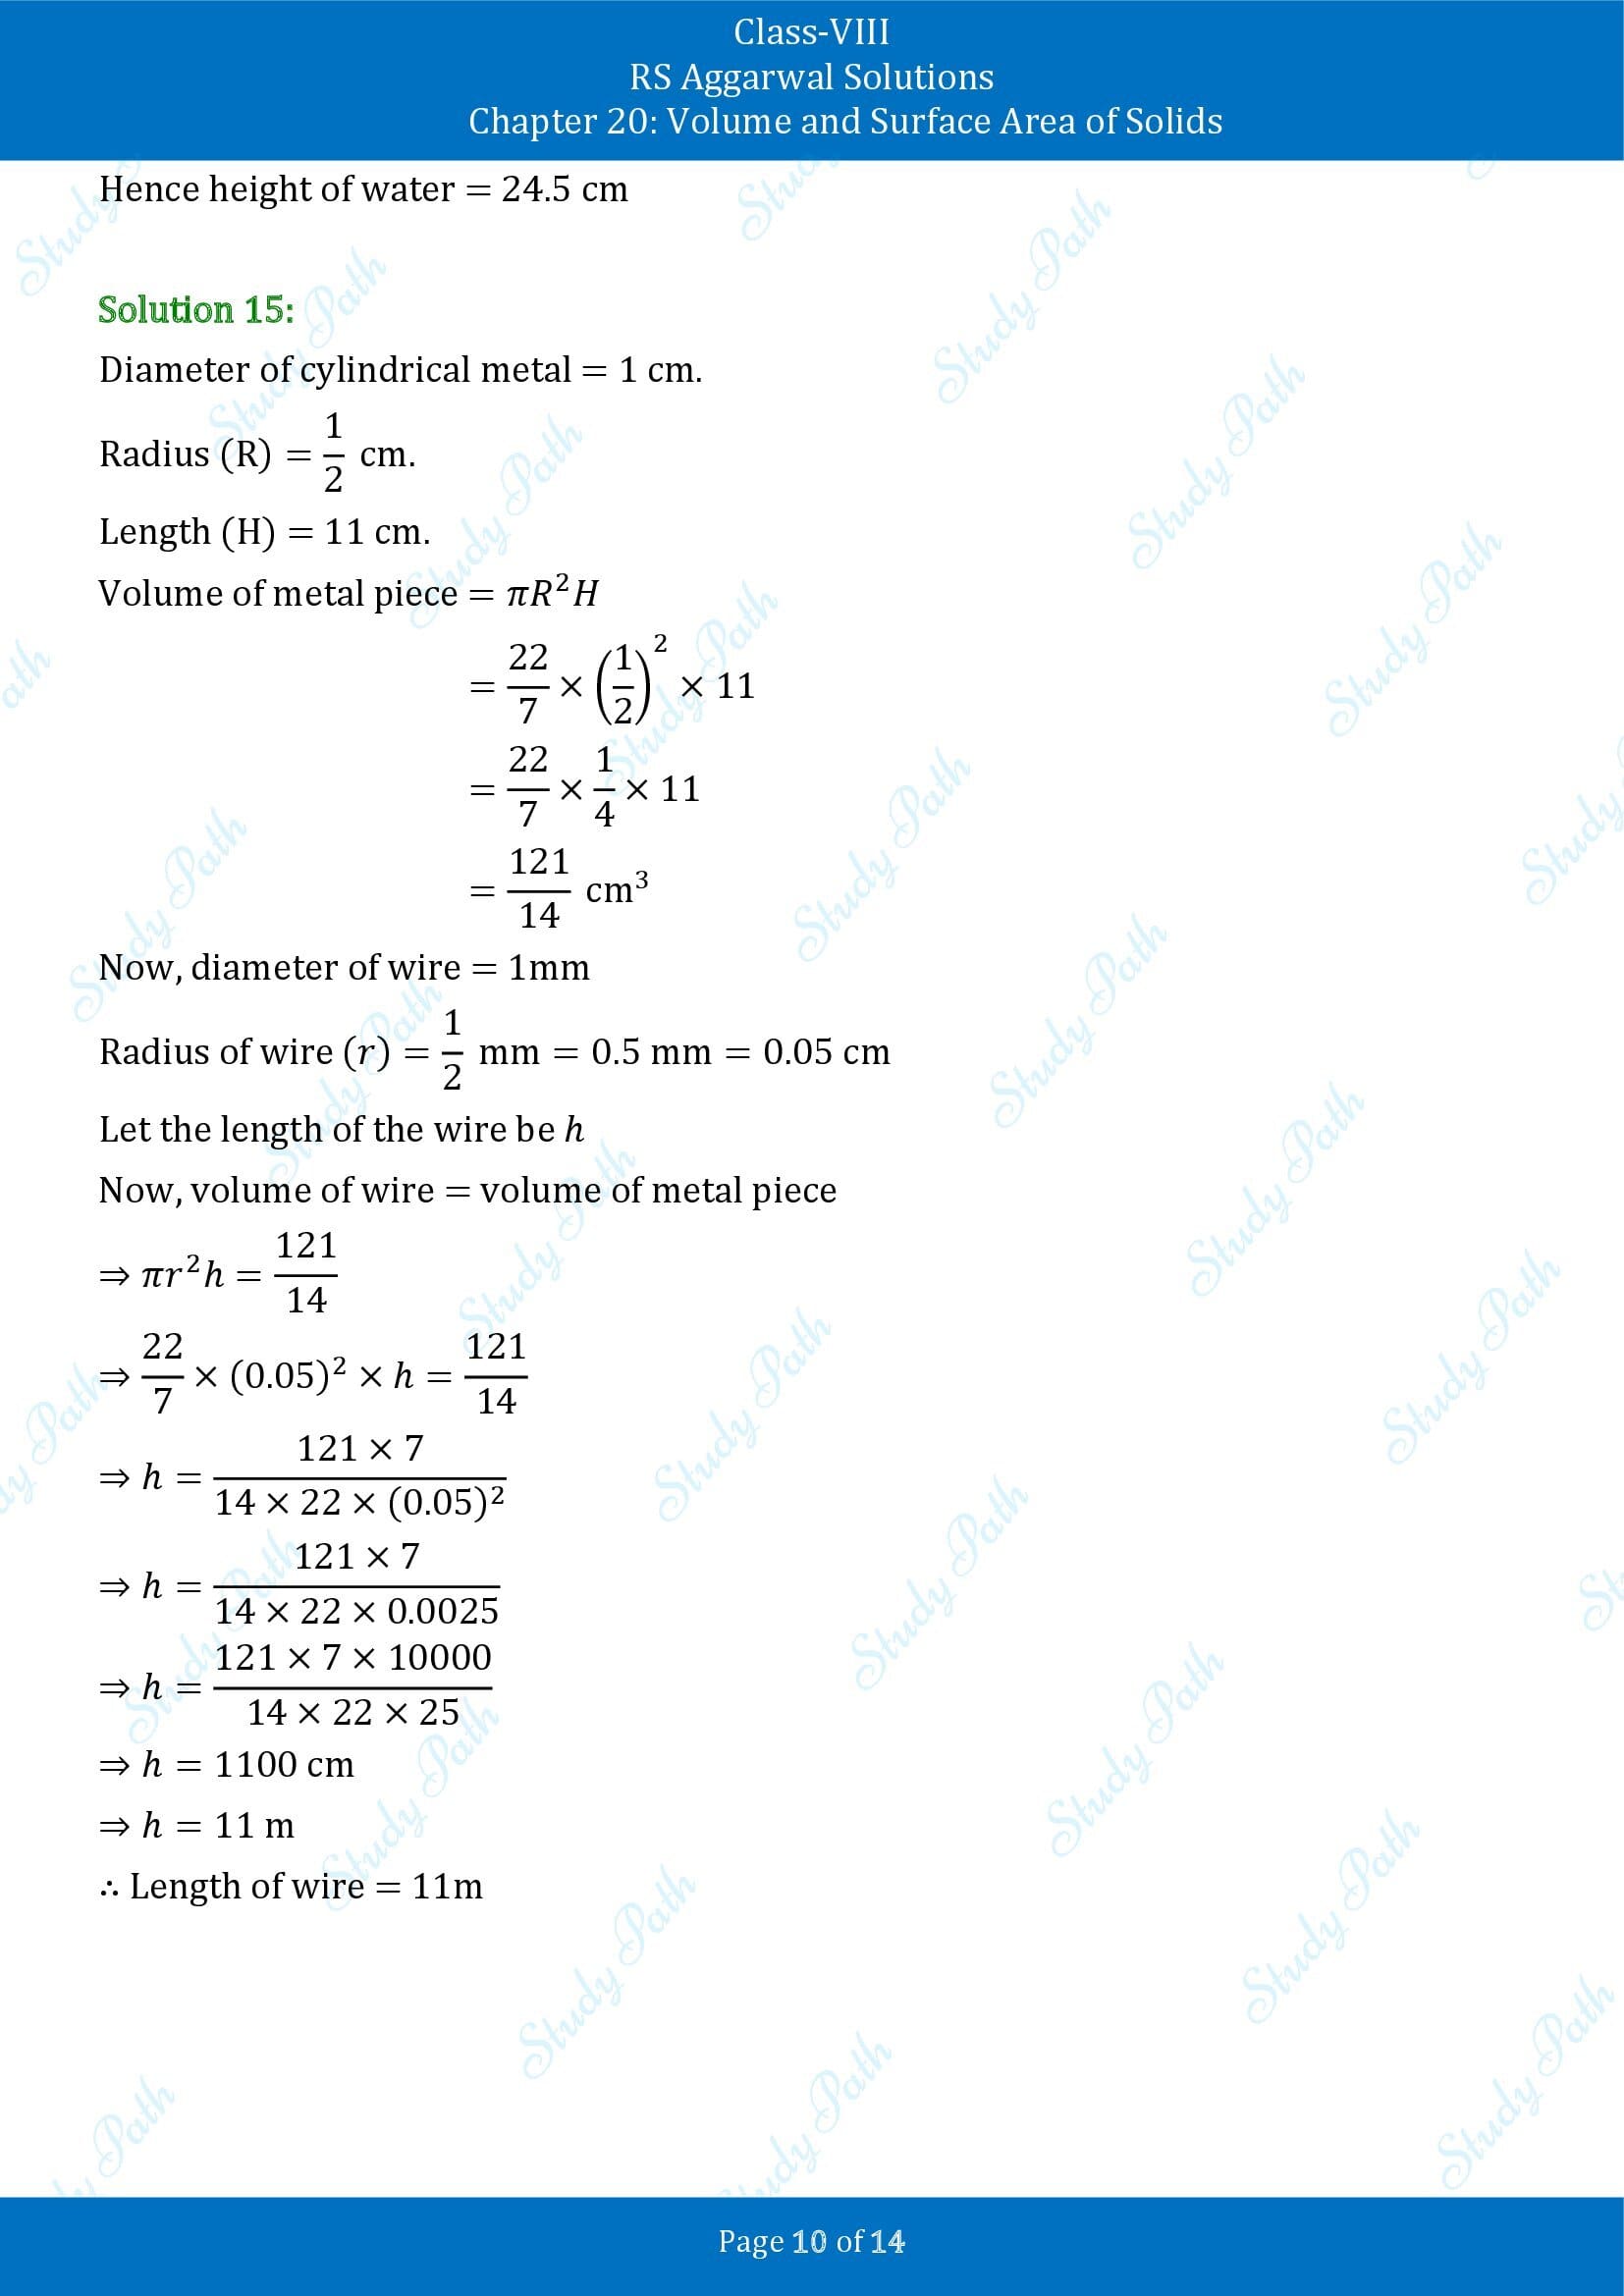 RS Aggarwal Solutions Class 8 Chapter 20 Volume and Surface Area of Solids Exercise 20B 00010